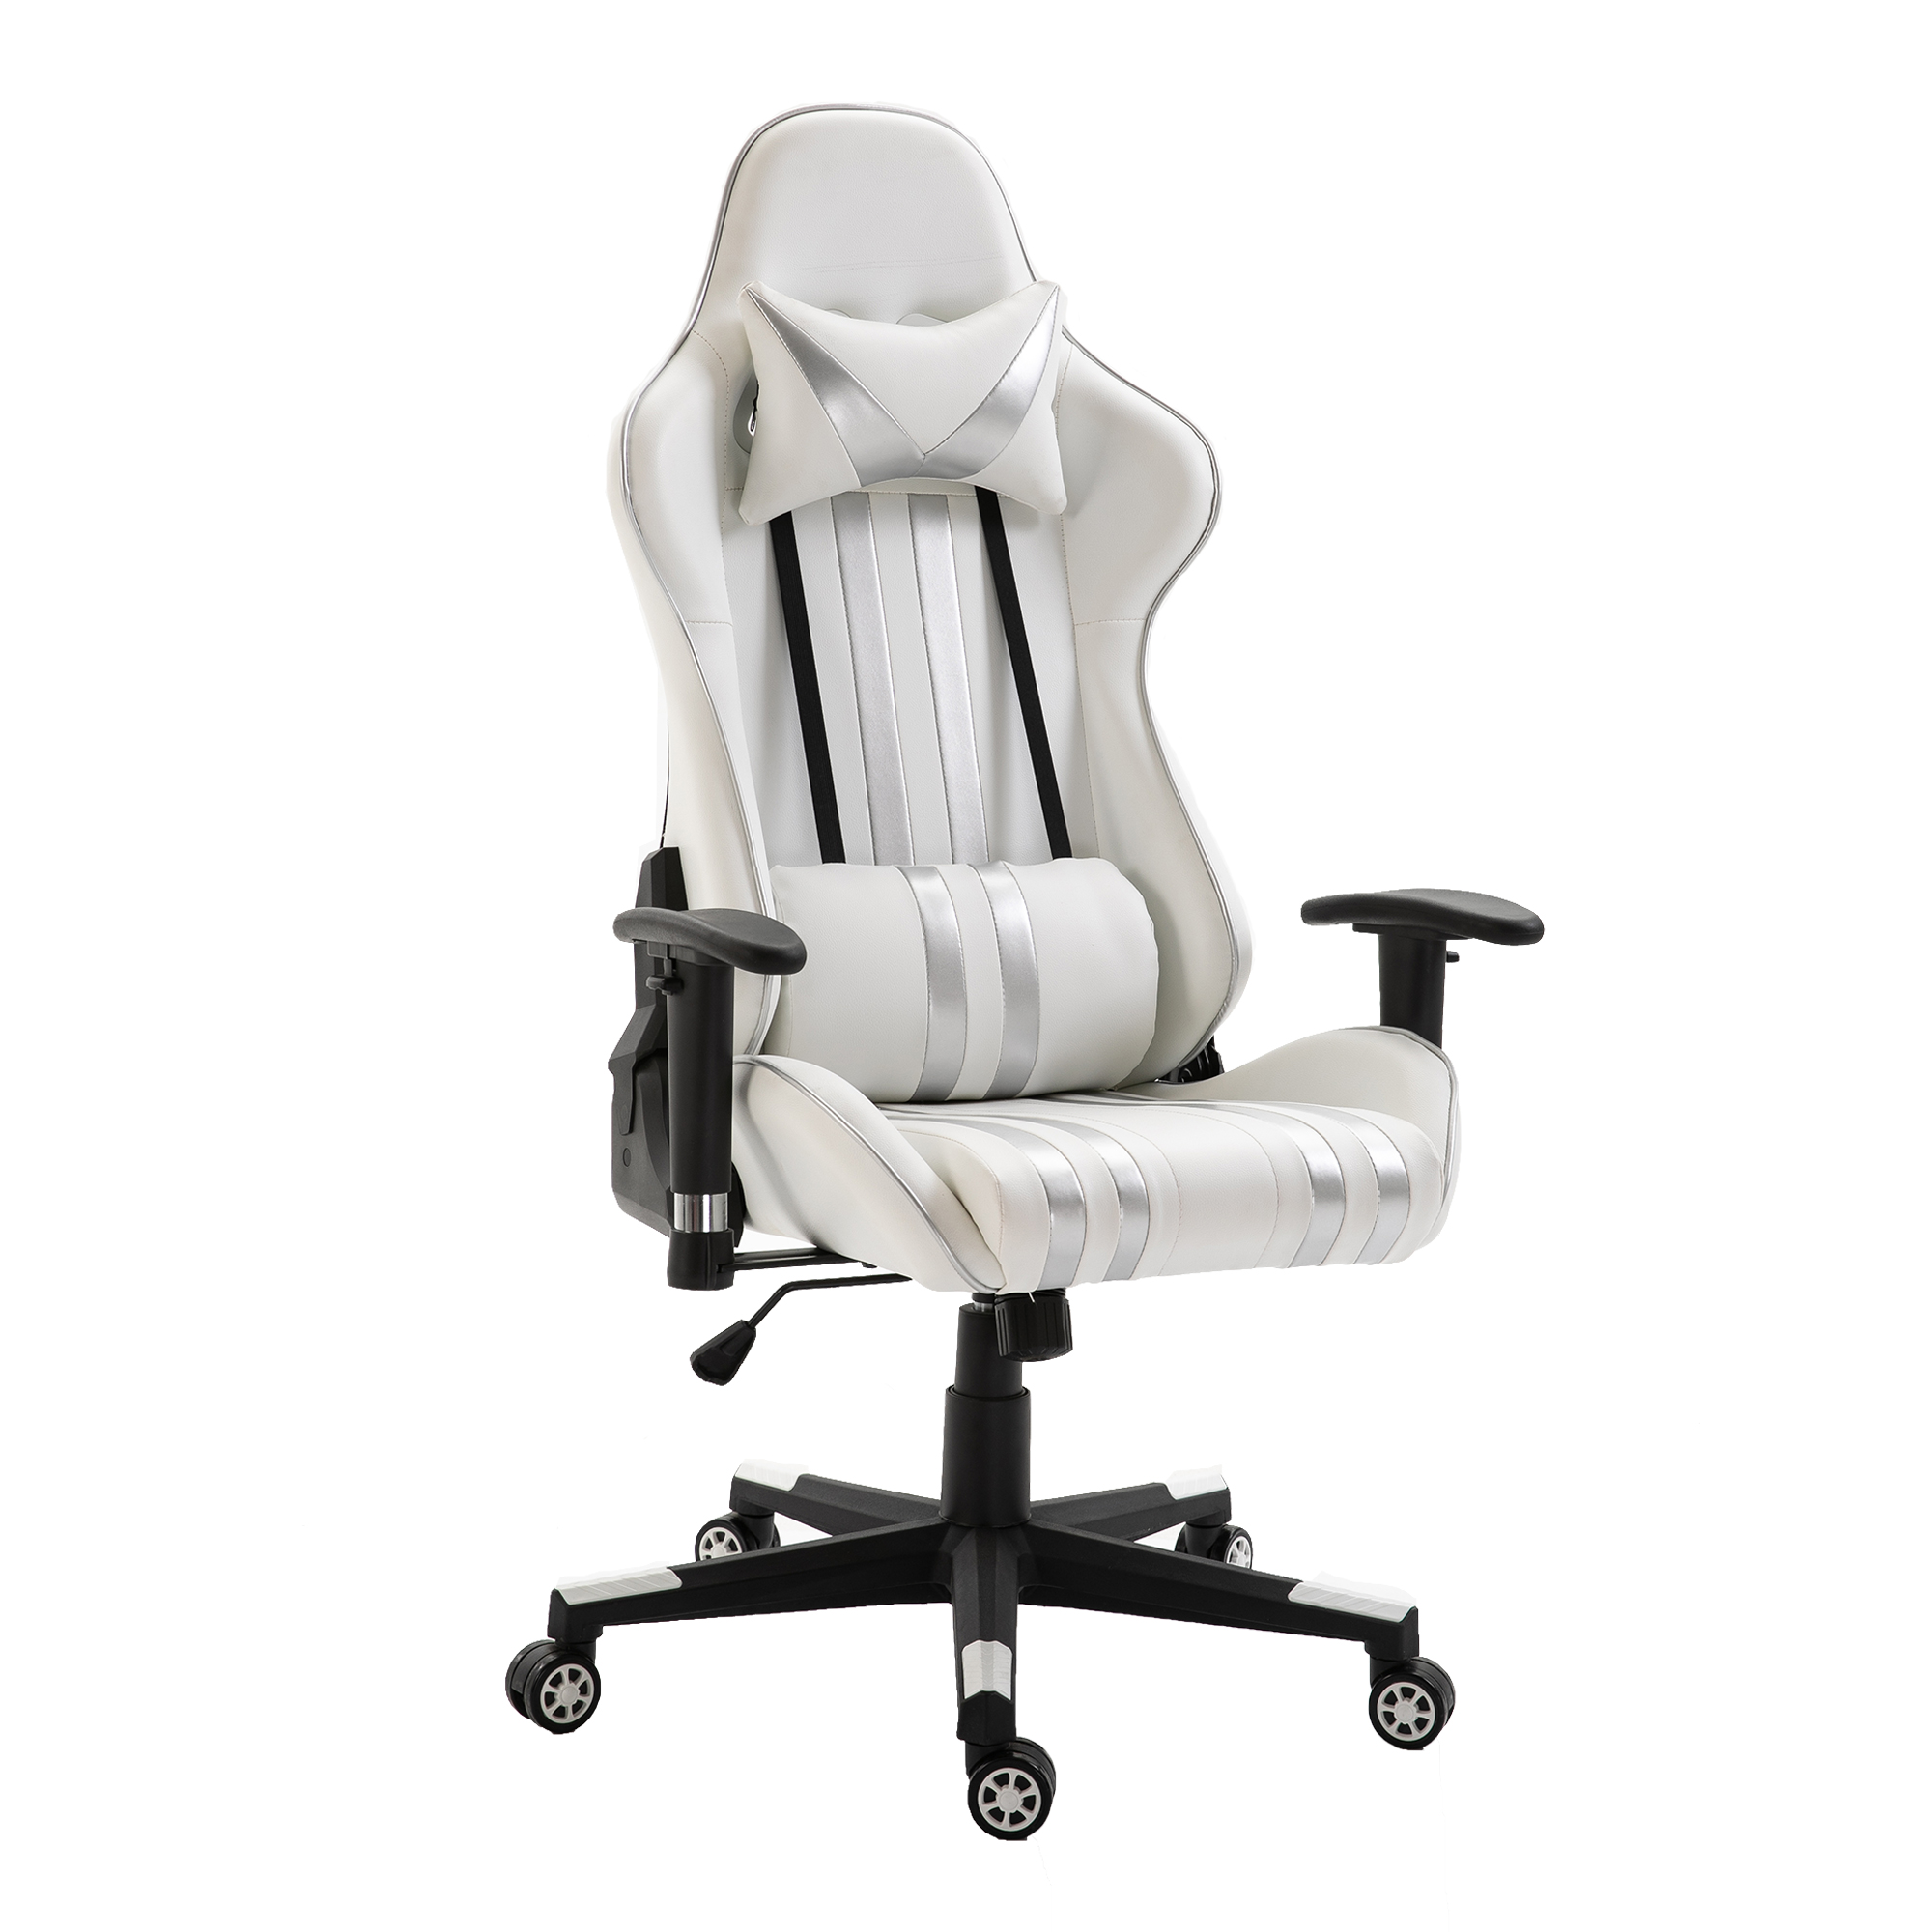 https://www.jifangfurniture.com/customized-good-quality-rotating-and-comfortable-ergonomic-backrest-gaming-chair-product/